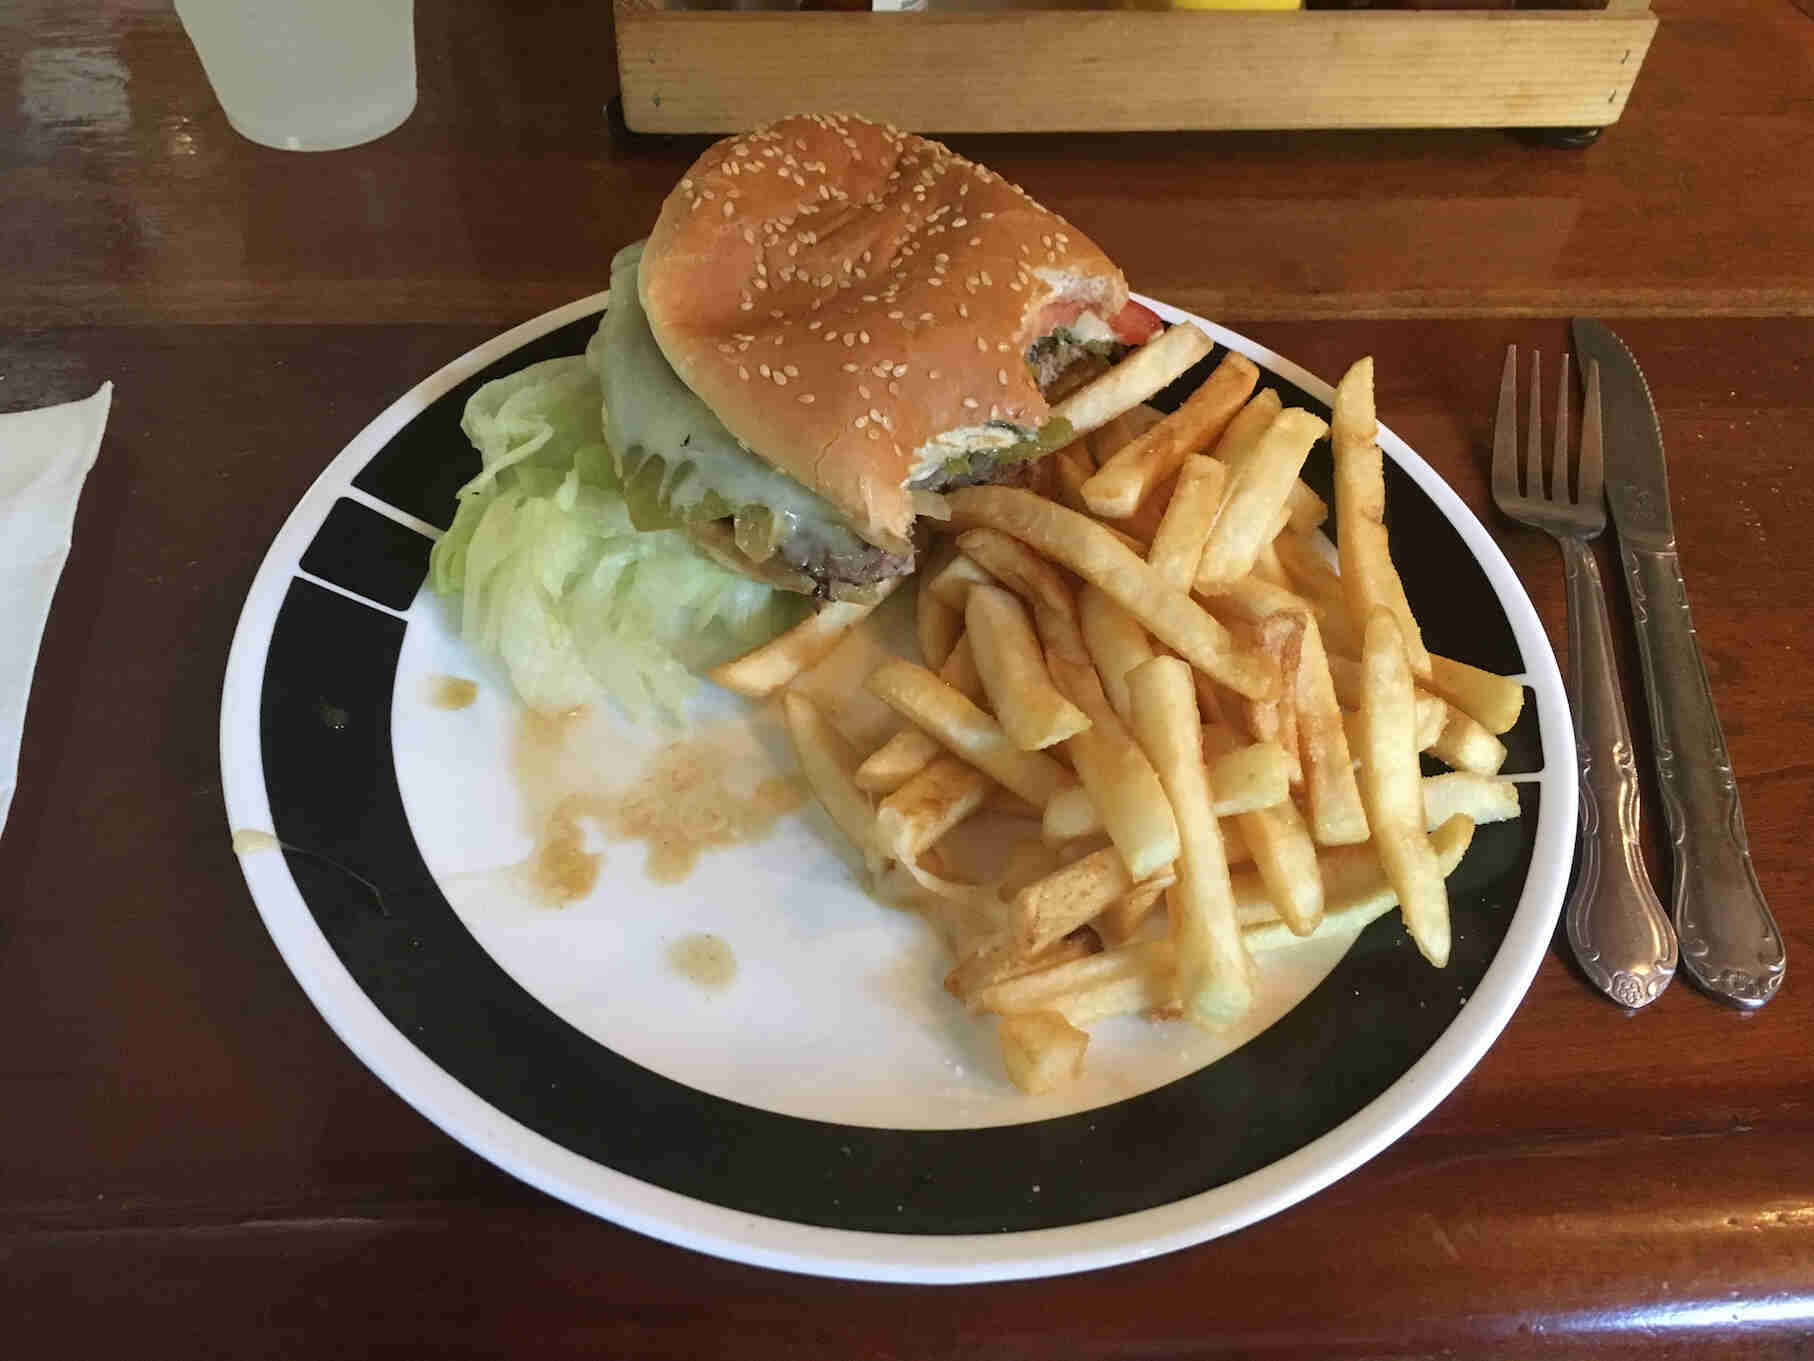 Downward view of a plate with a burger and fries on a table